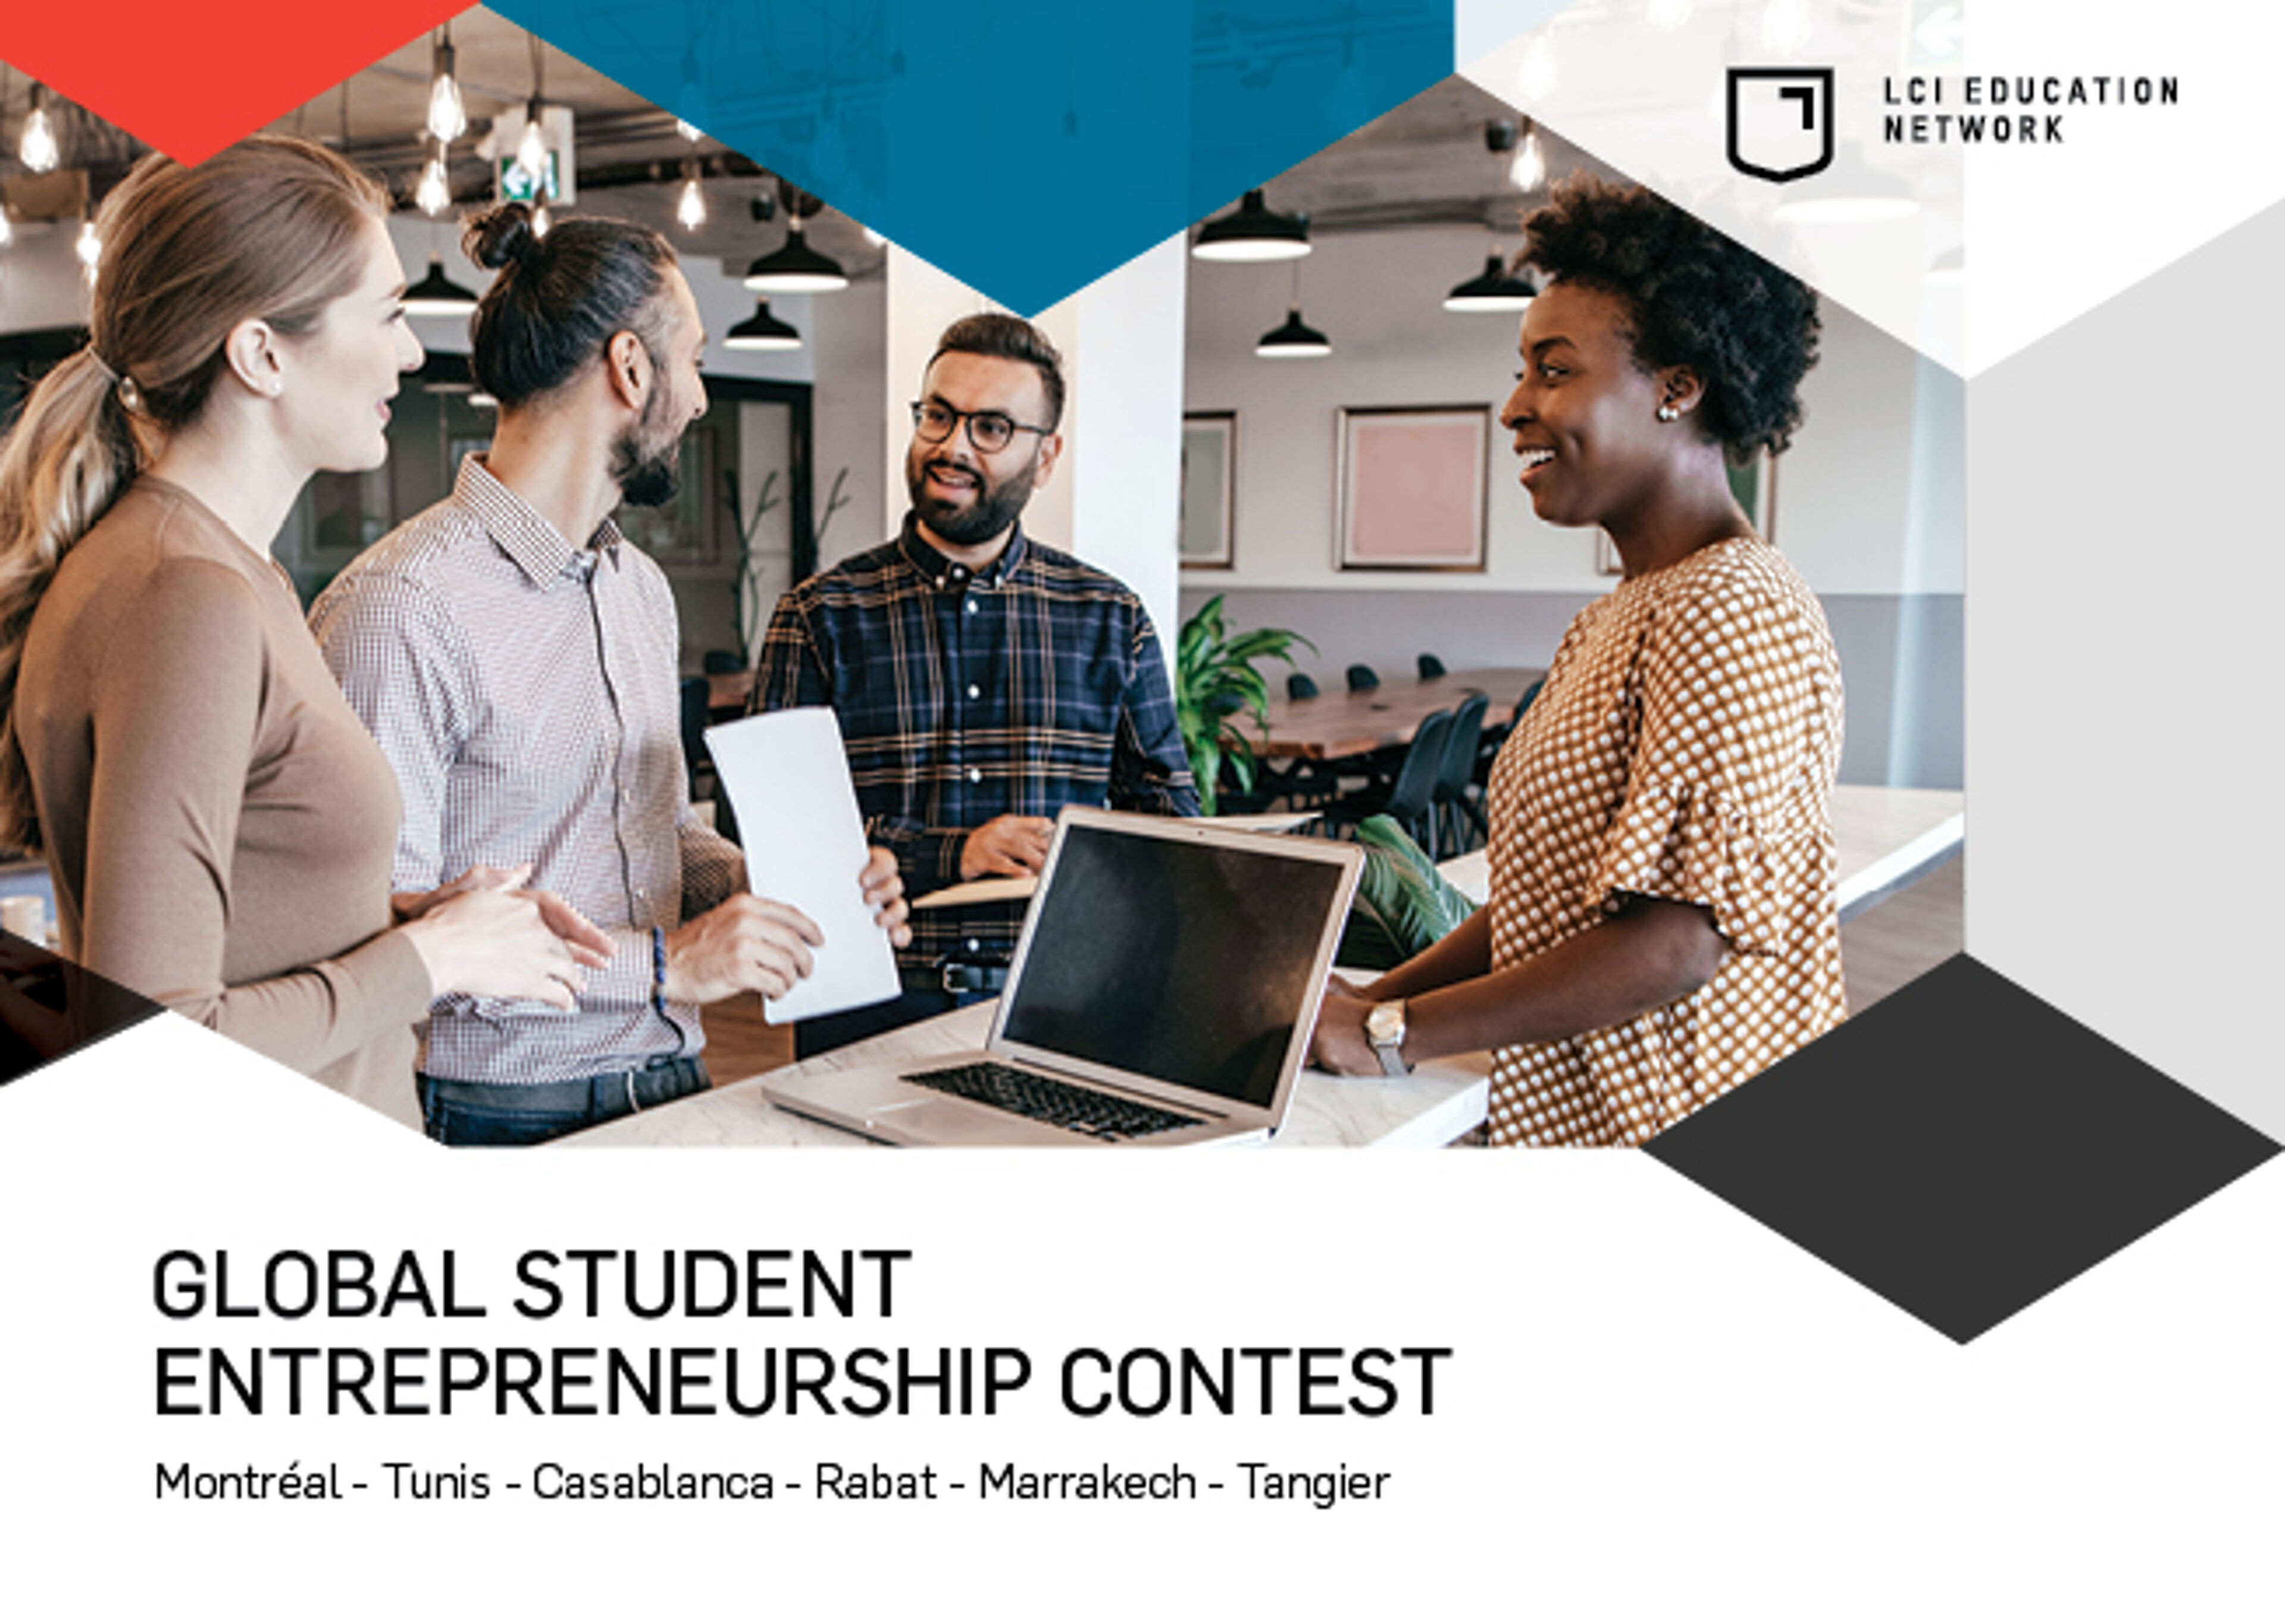 A diverse group of students collaborates in a modern office setting, brainstorming for a global entrepreneurship contest.